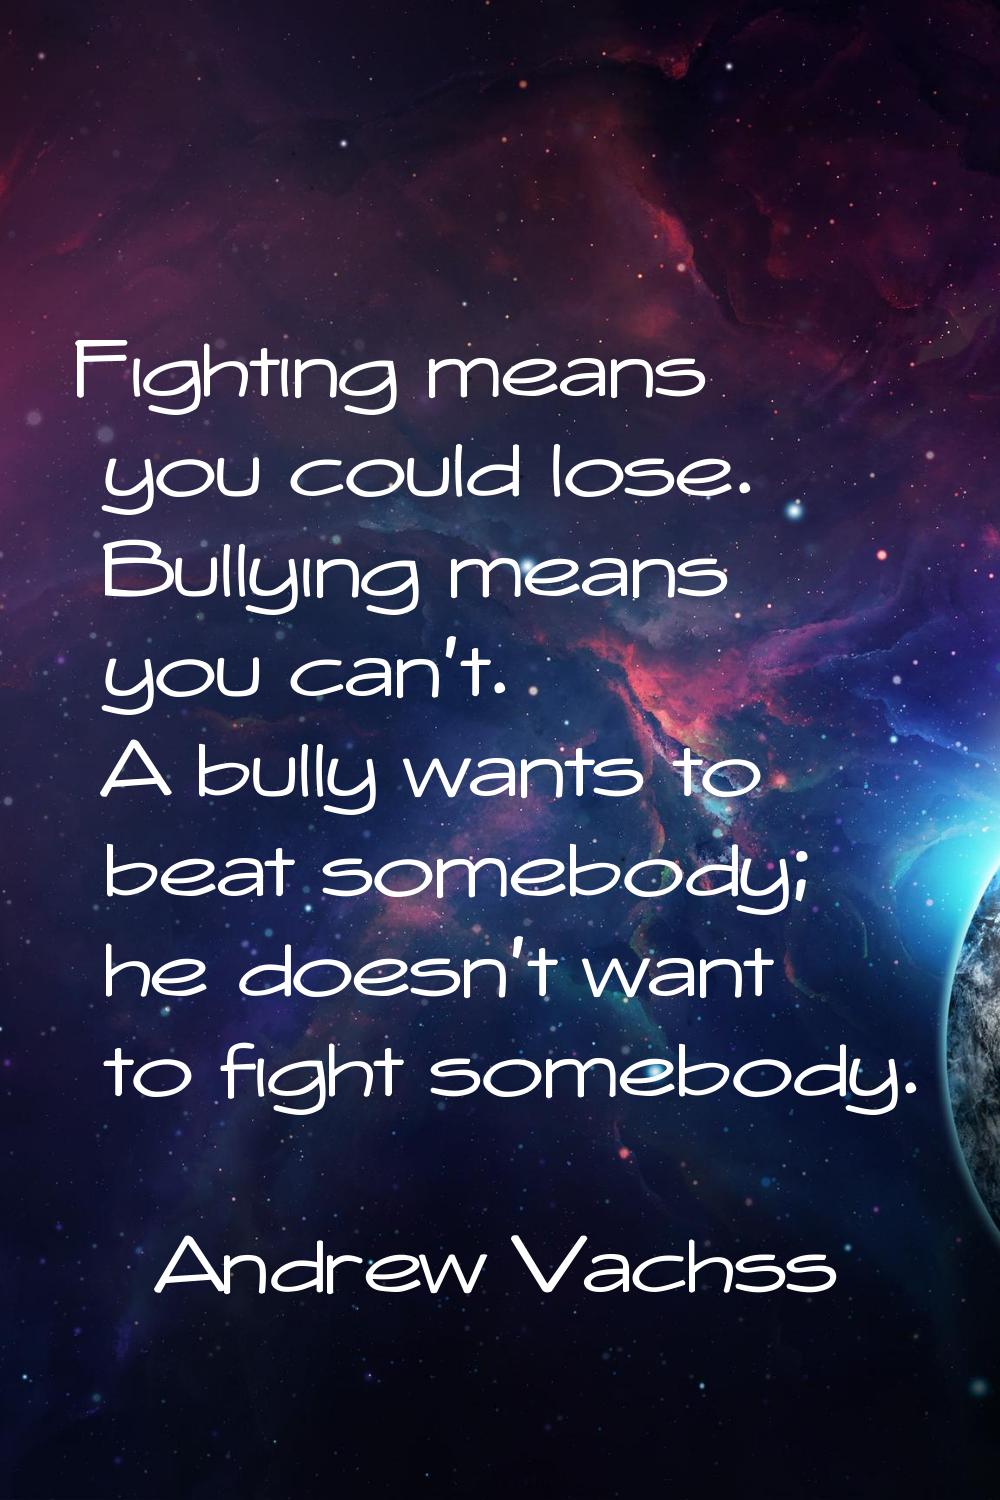 Fighting means you could lose. Bullying means you can't. A bully wants to beat somebody; he doesn't